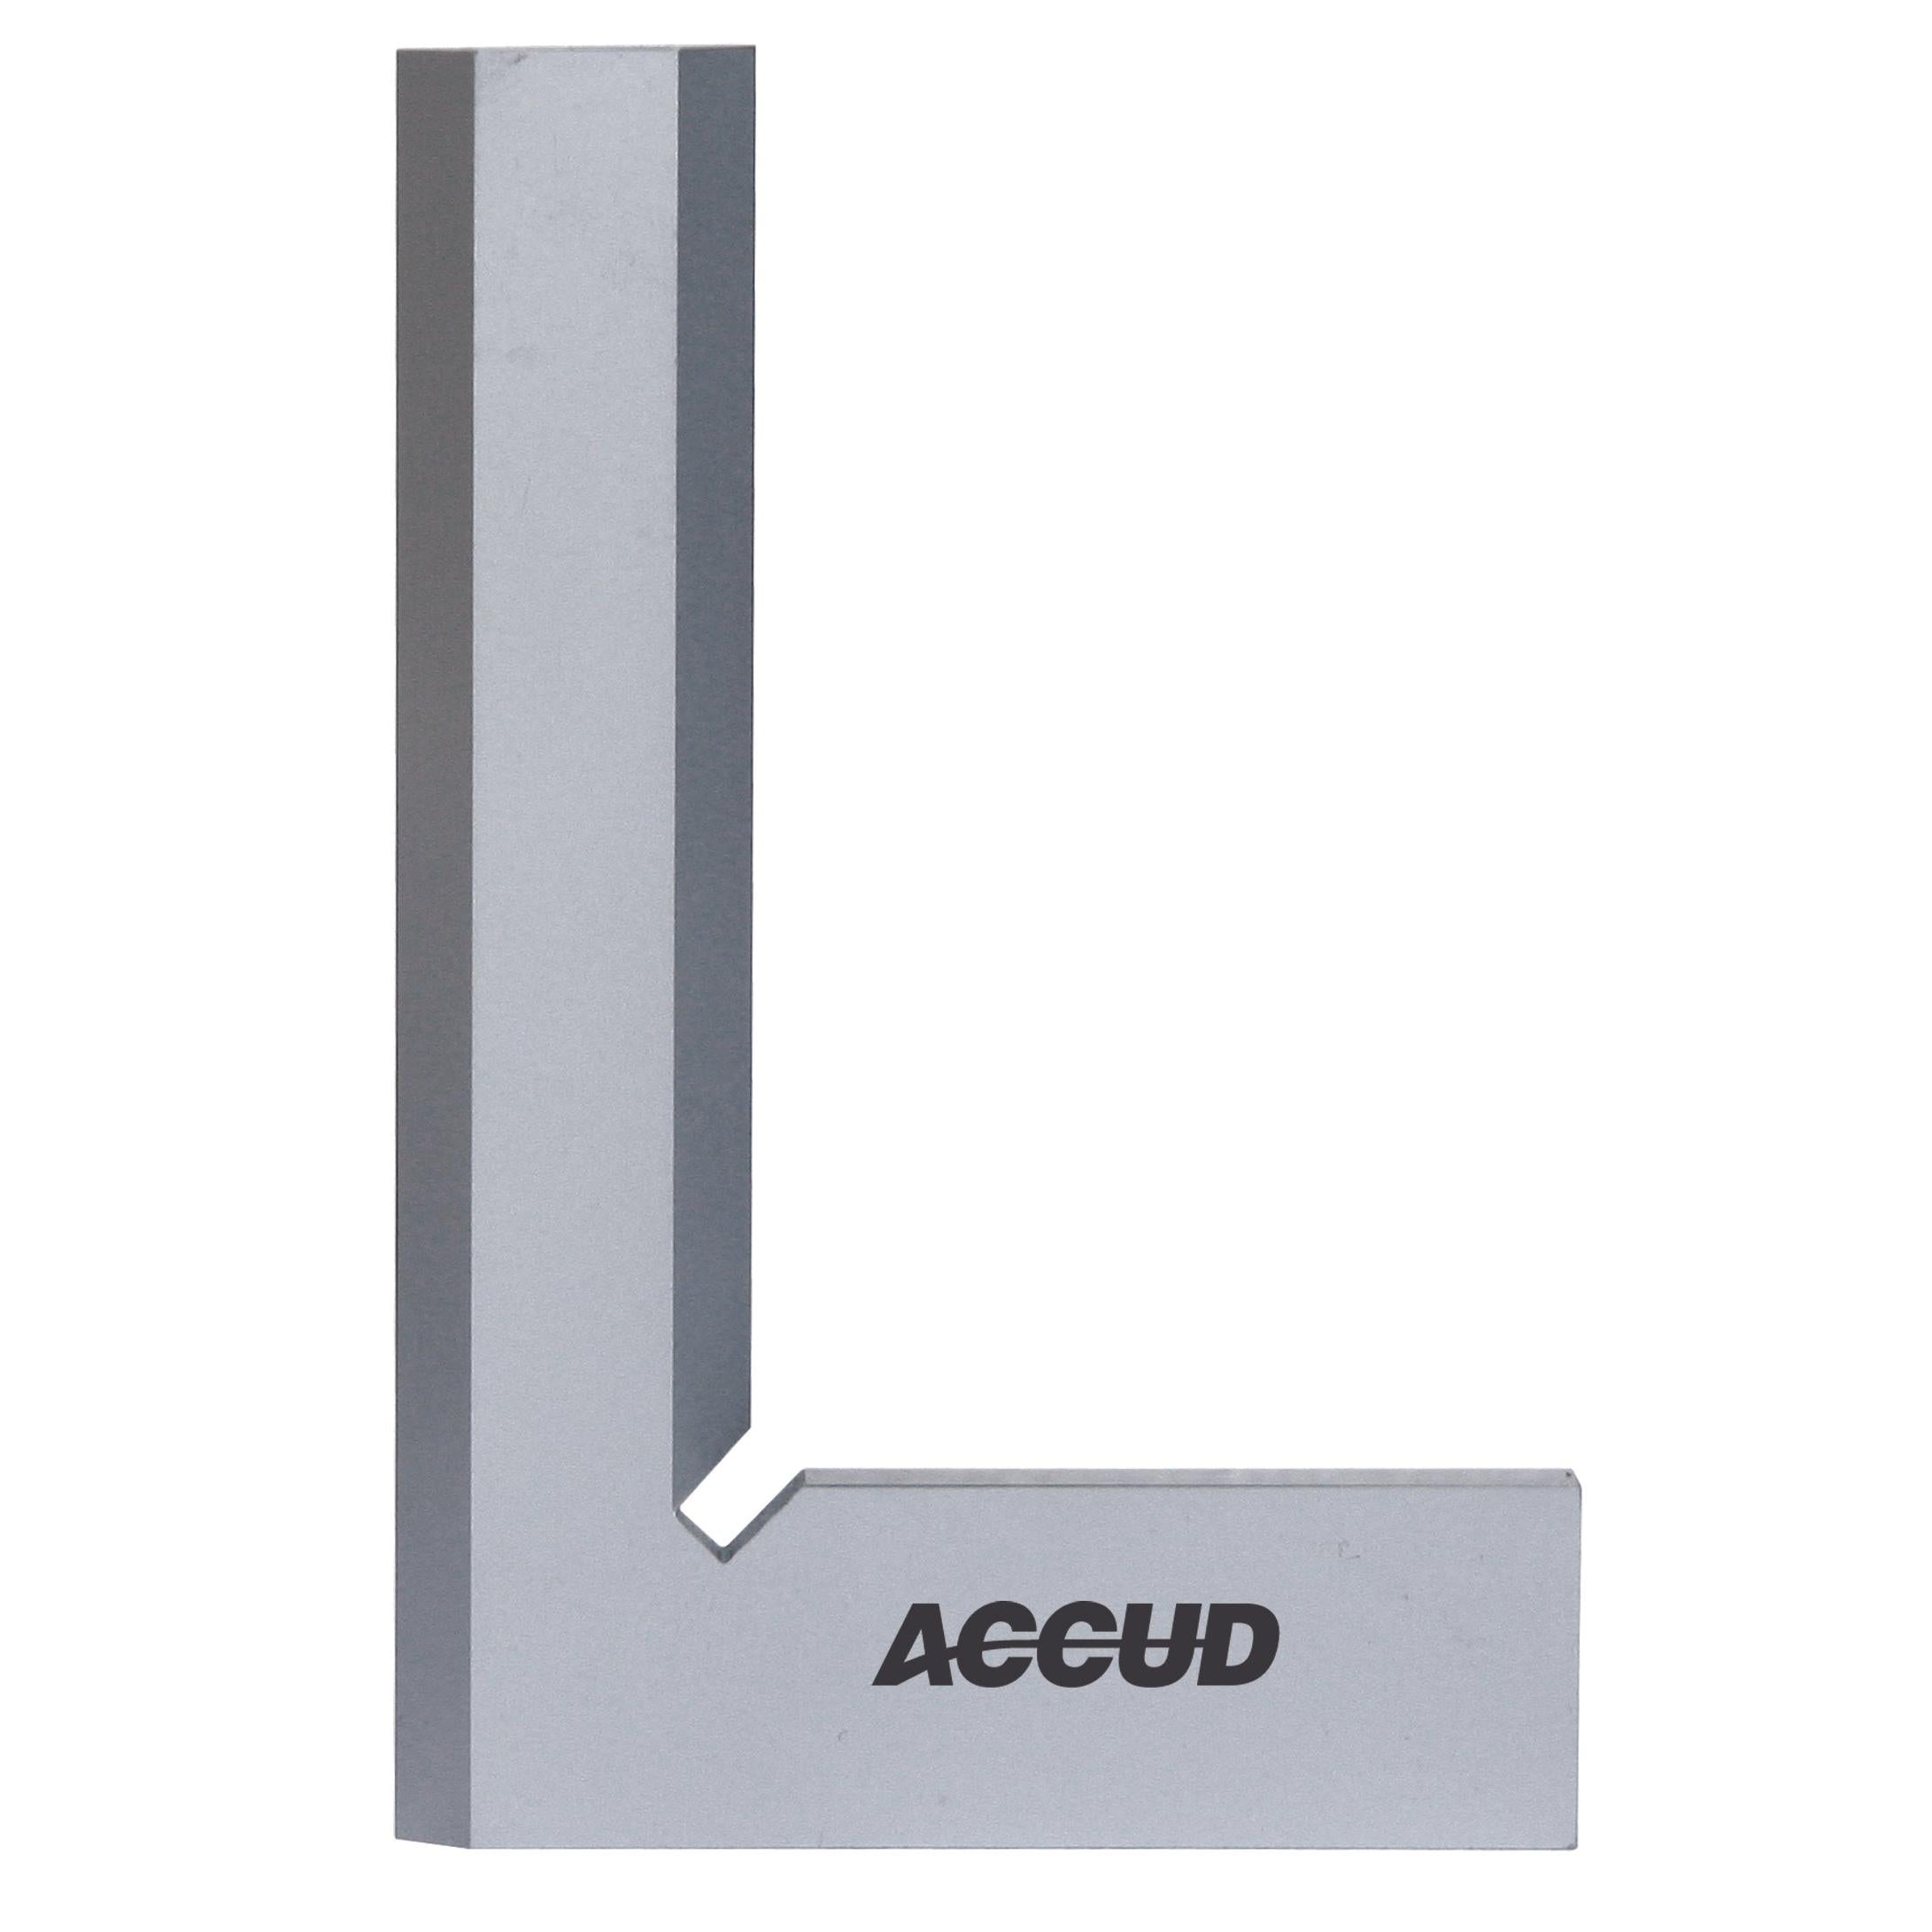 ACCUD | Beveled Edge Square 75X50Mm | 832-003-10 Power Tool Services